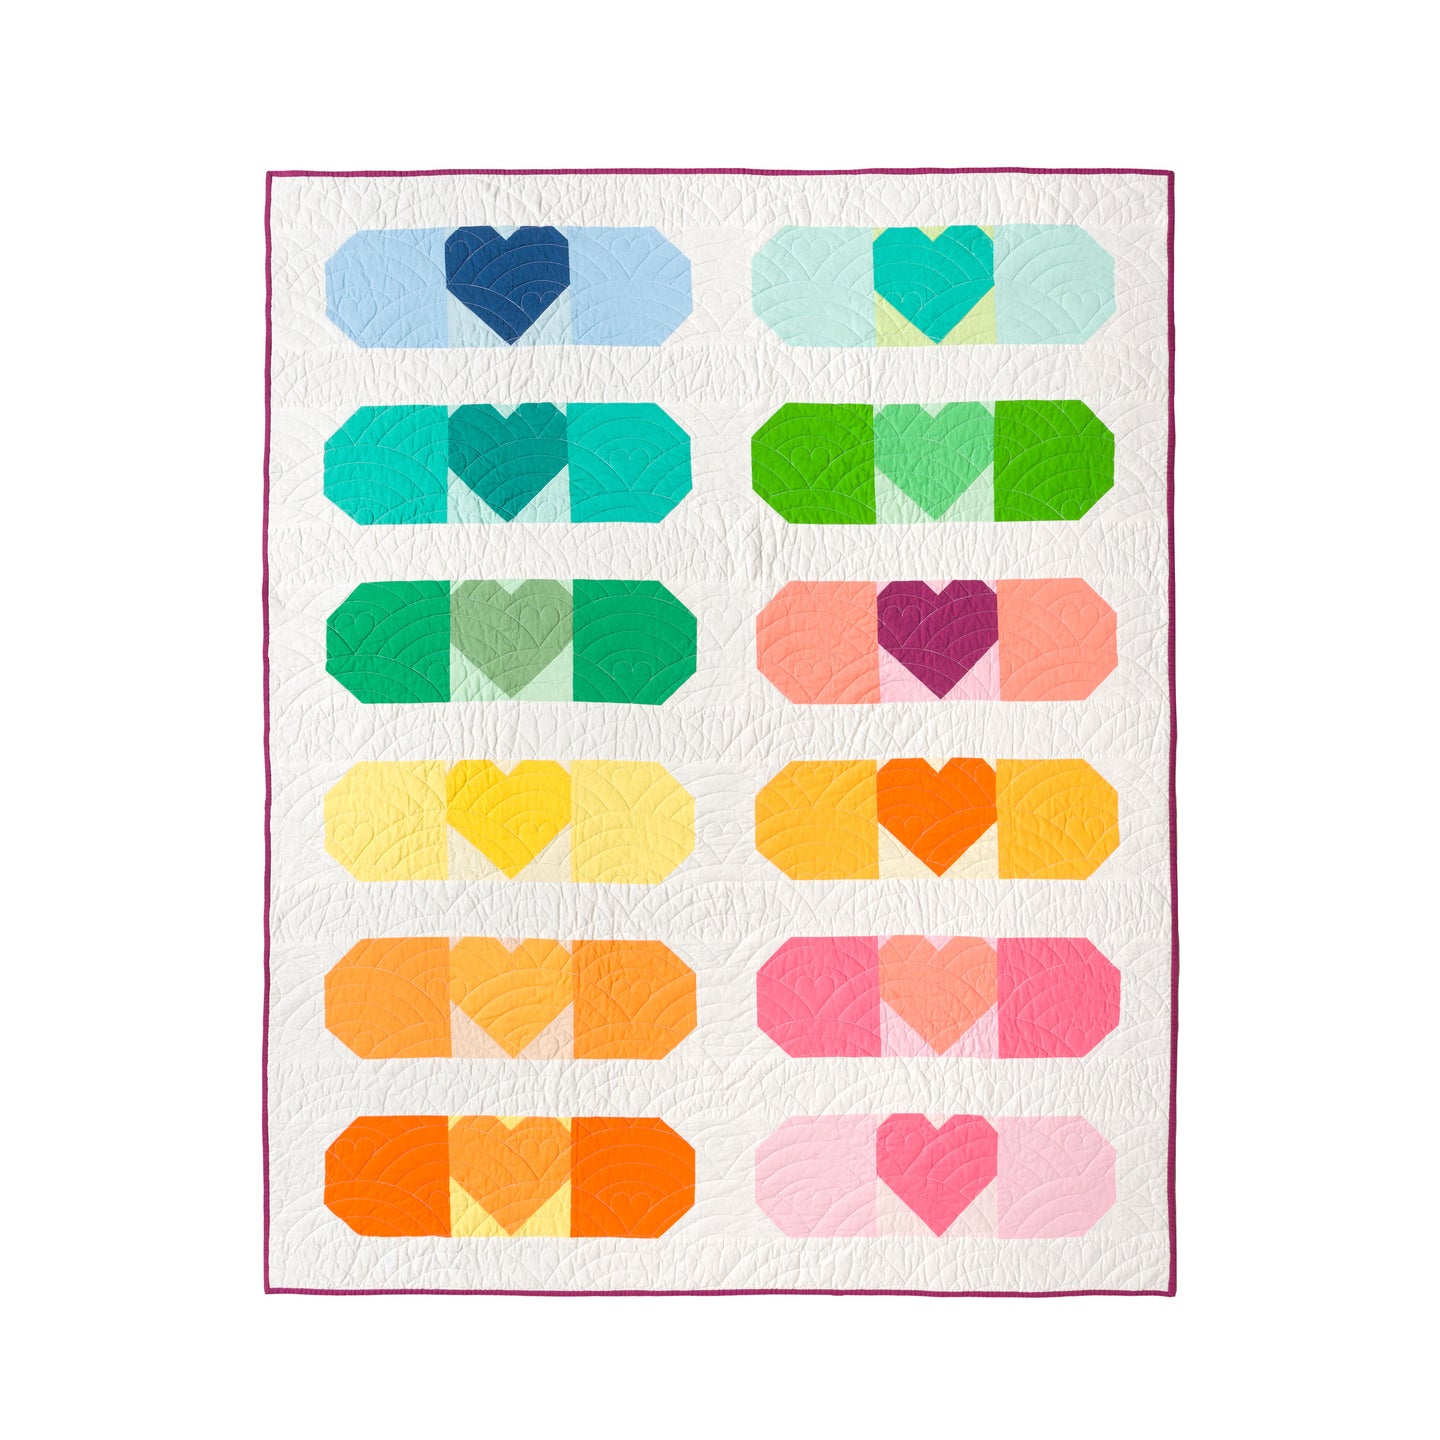 Band-Aid Quilt - Paper